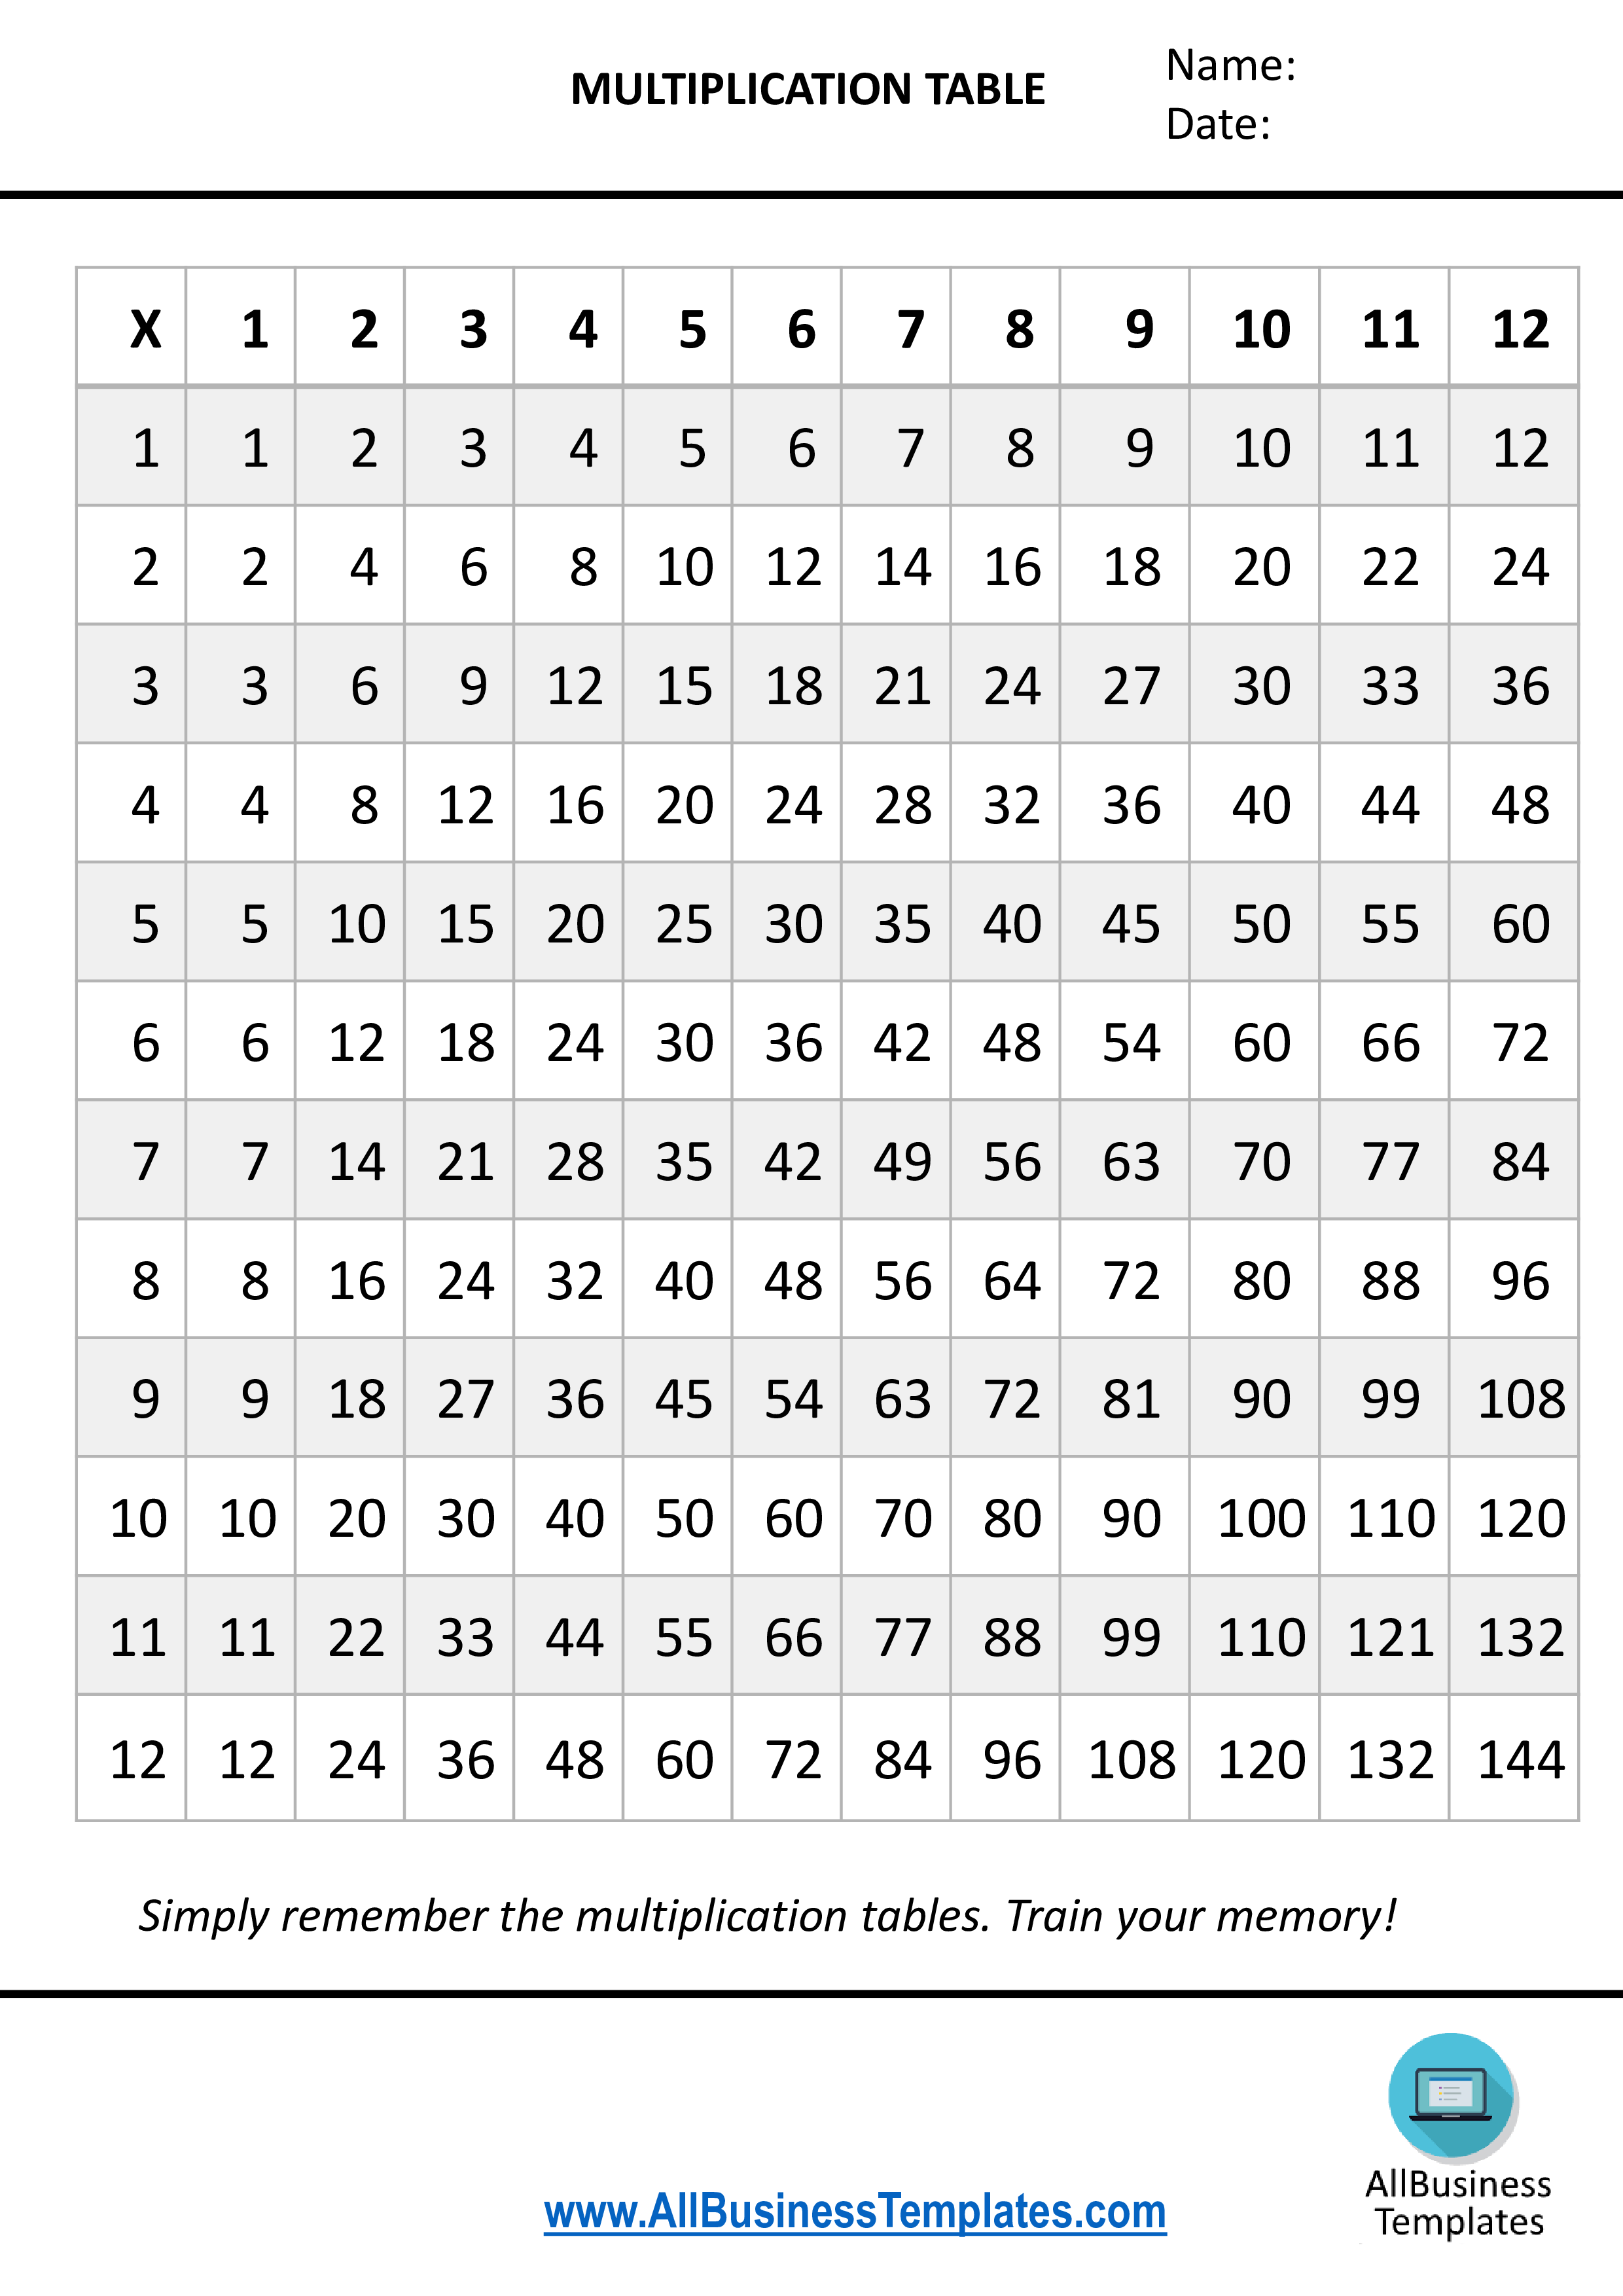 Multiplication Table 1 to 12X main image